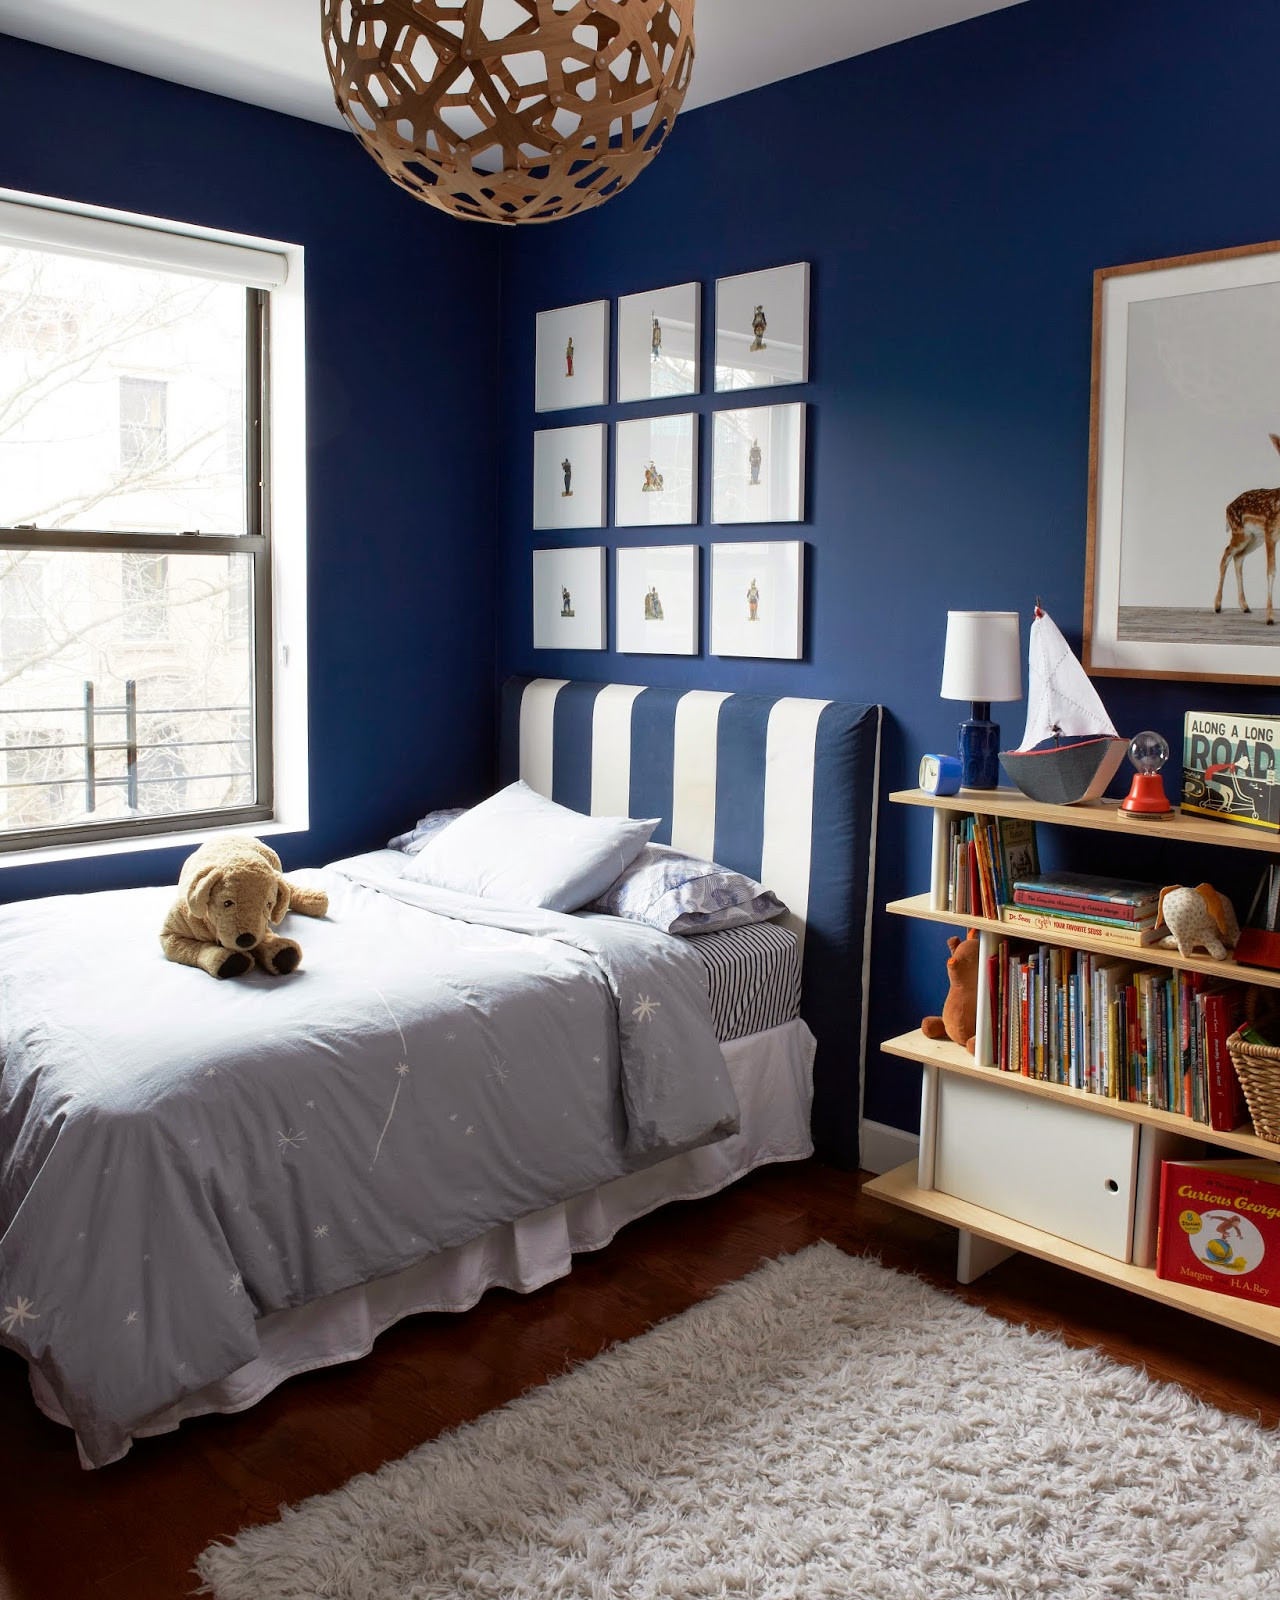 Paint Colors For The Bedroom
 Help Which Bedroom Paint Color Would You Choose